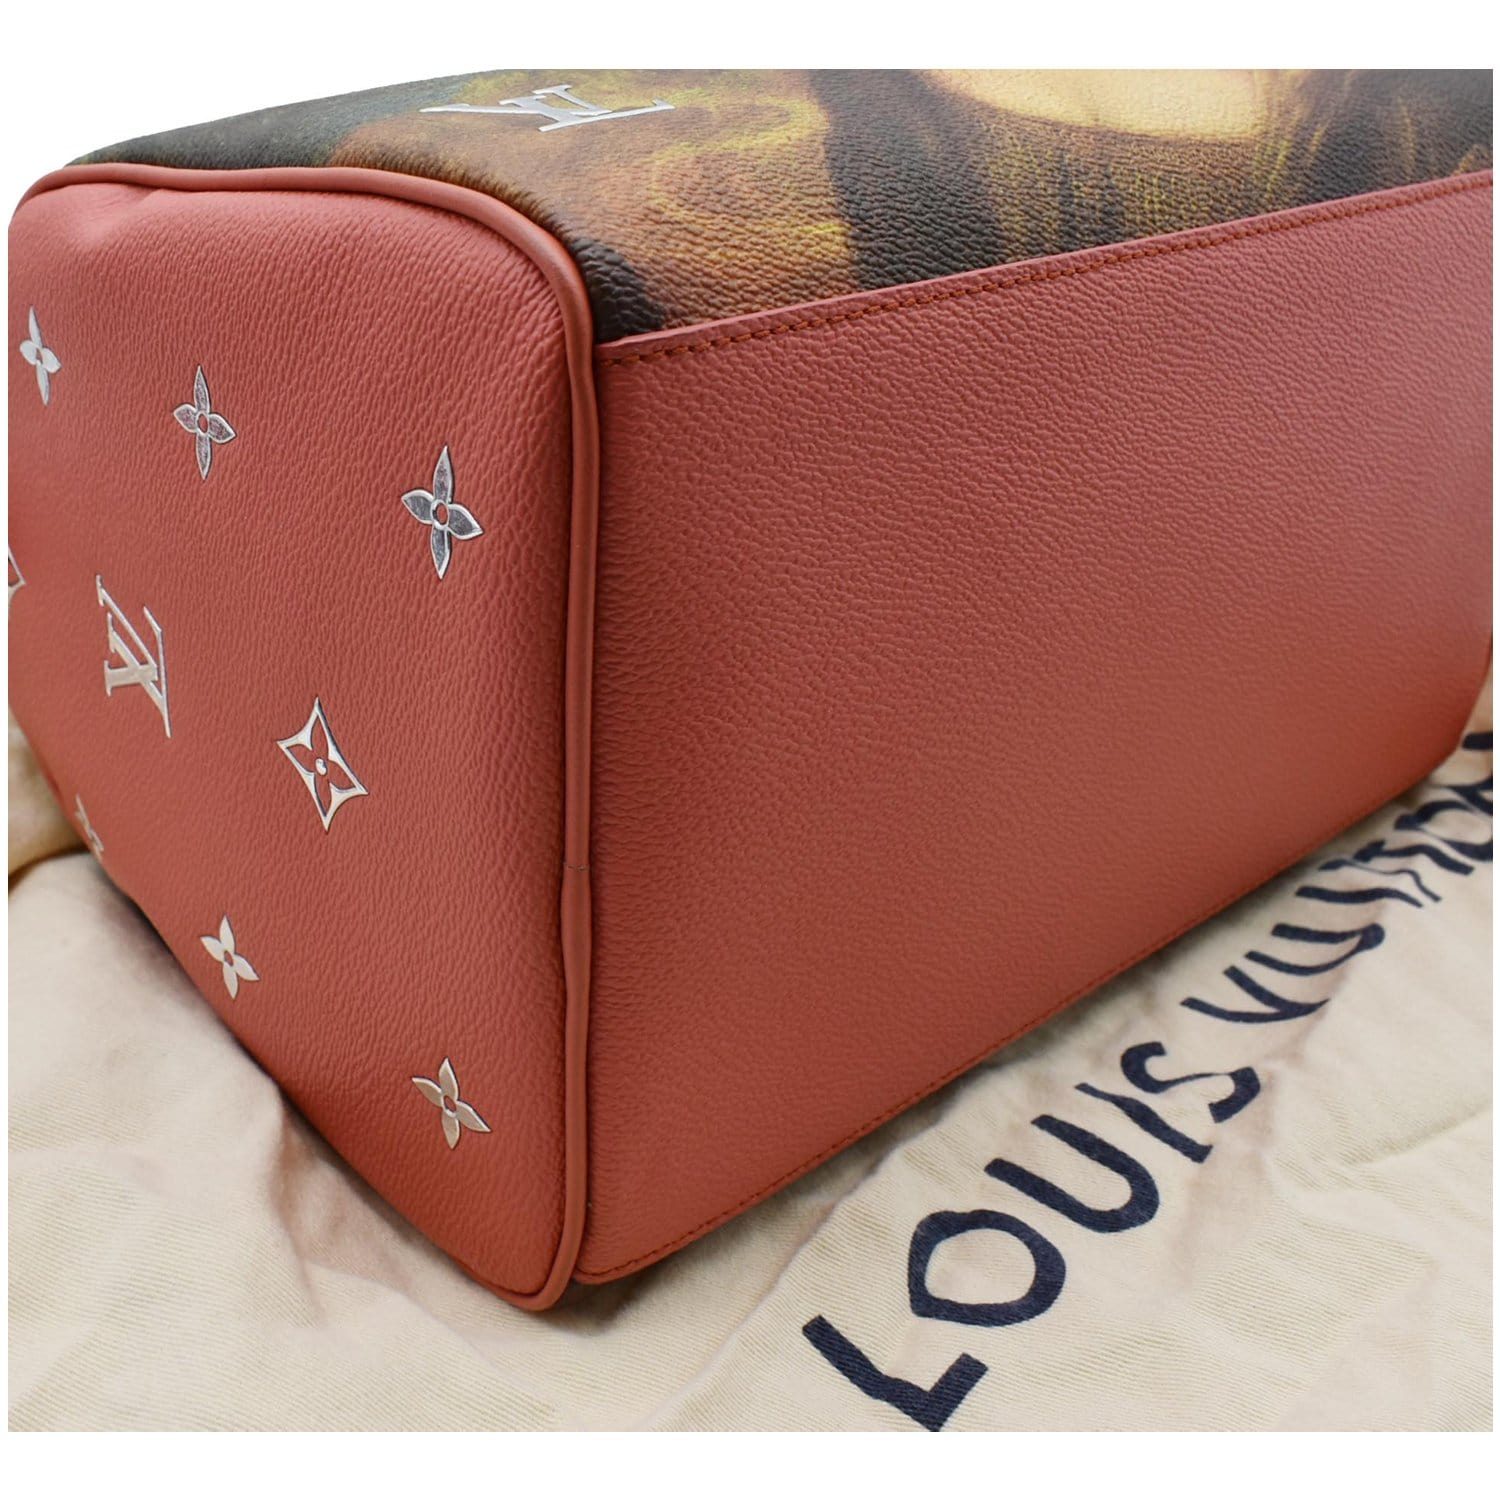 Preowned Authentic Louis Vuitton Limited Edition Coated Canvas Jeff Koons  Monet Neverfull MM Bag